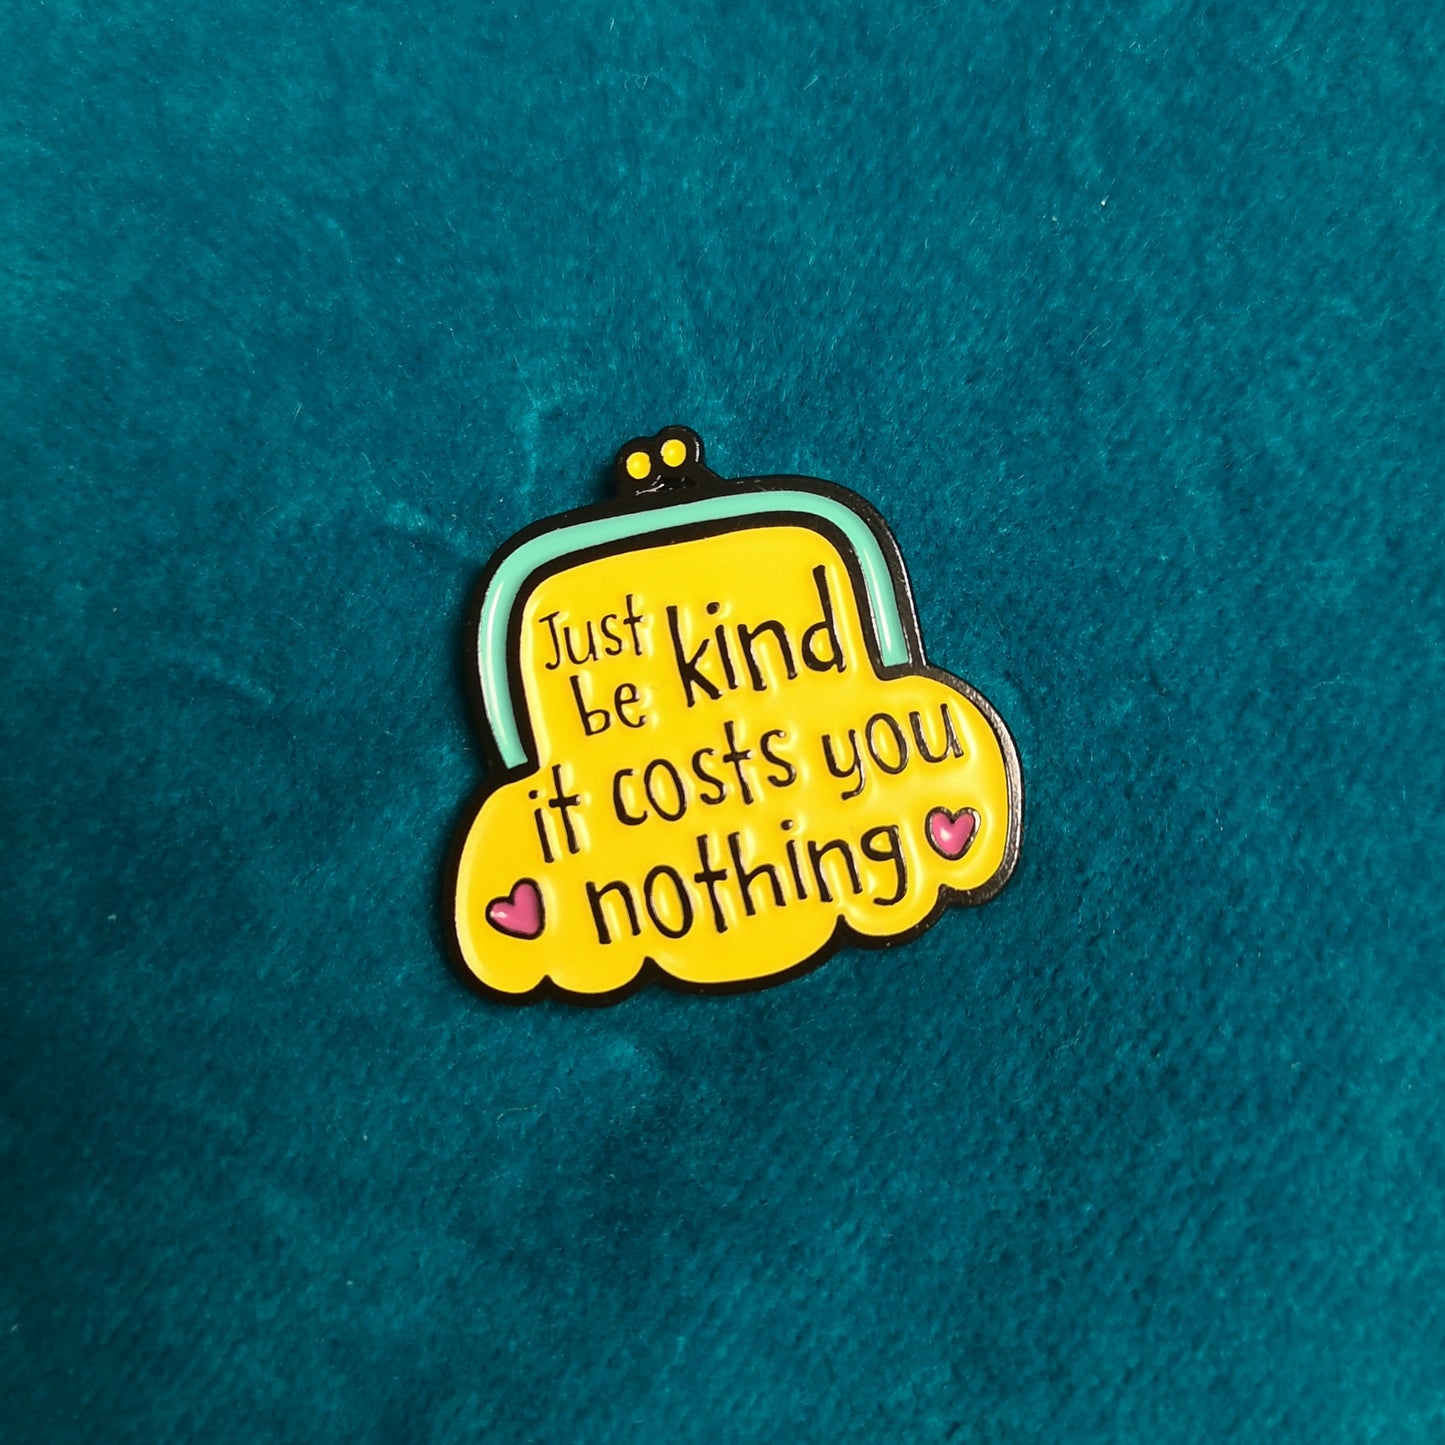 Just Be Kind It Costs Nothing - Enamel Pin